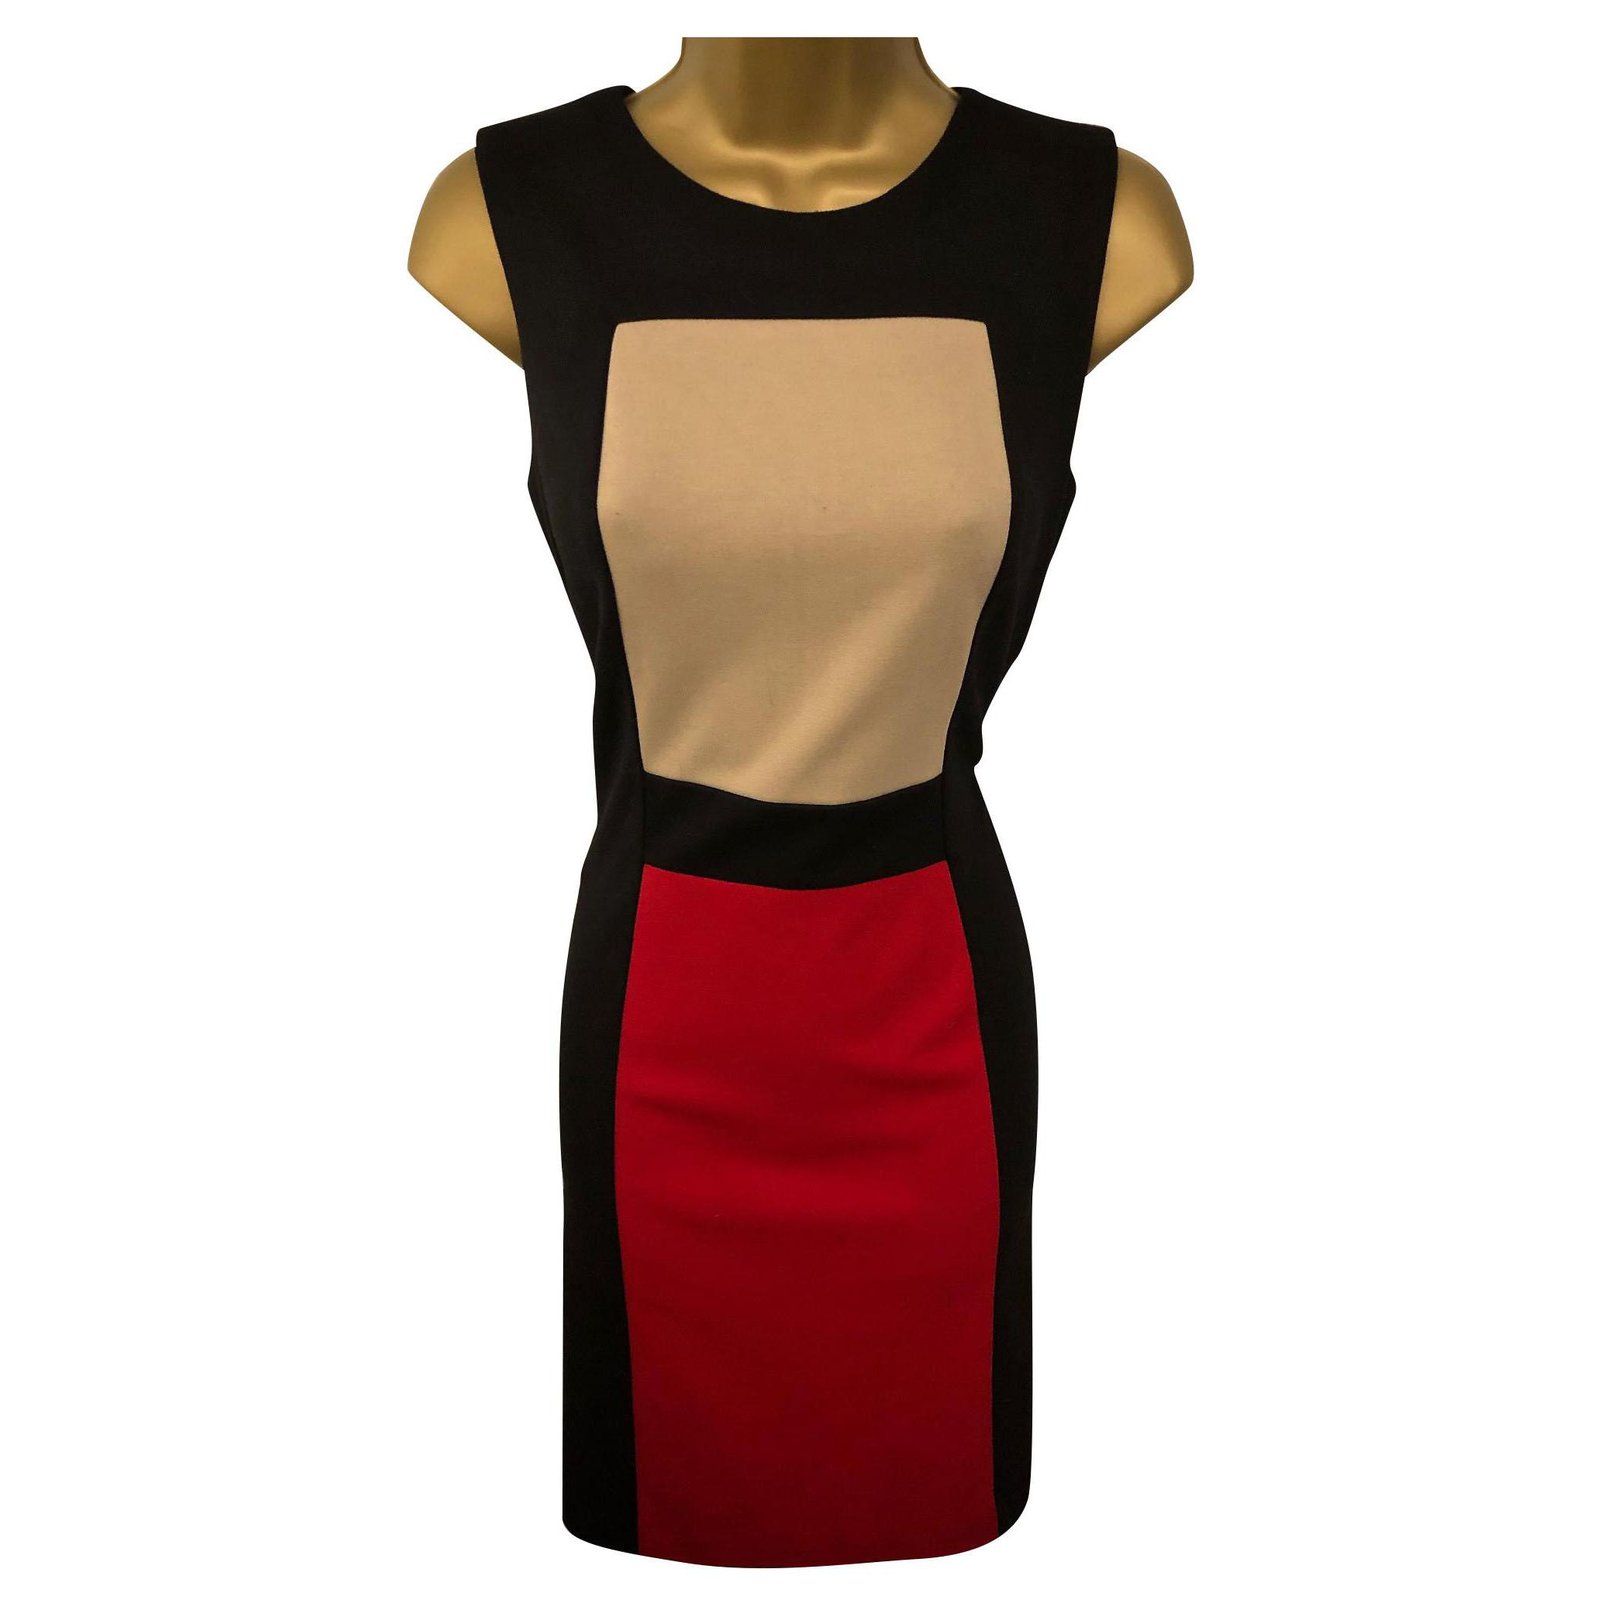 calvin klein red and black dress